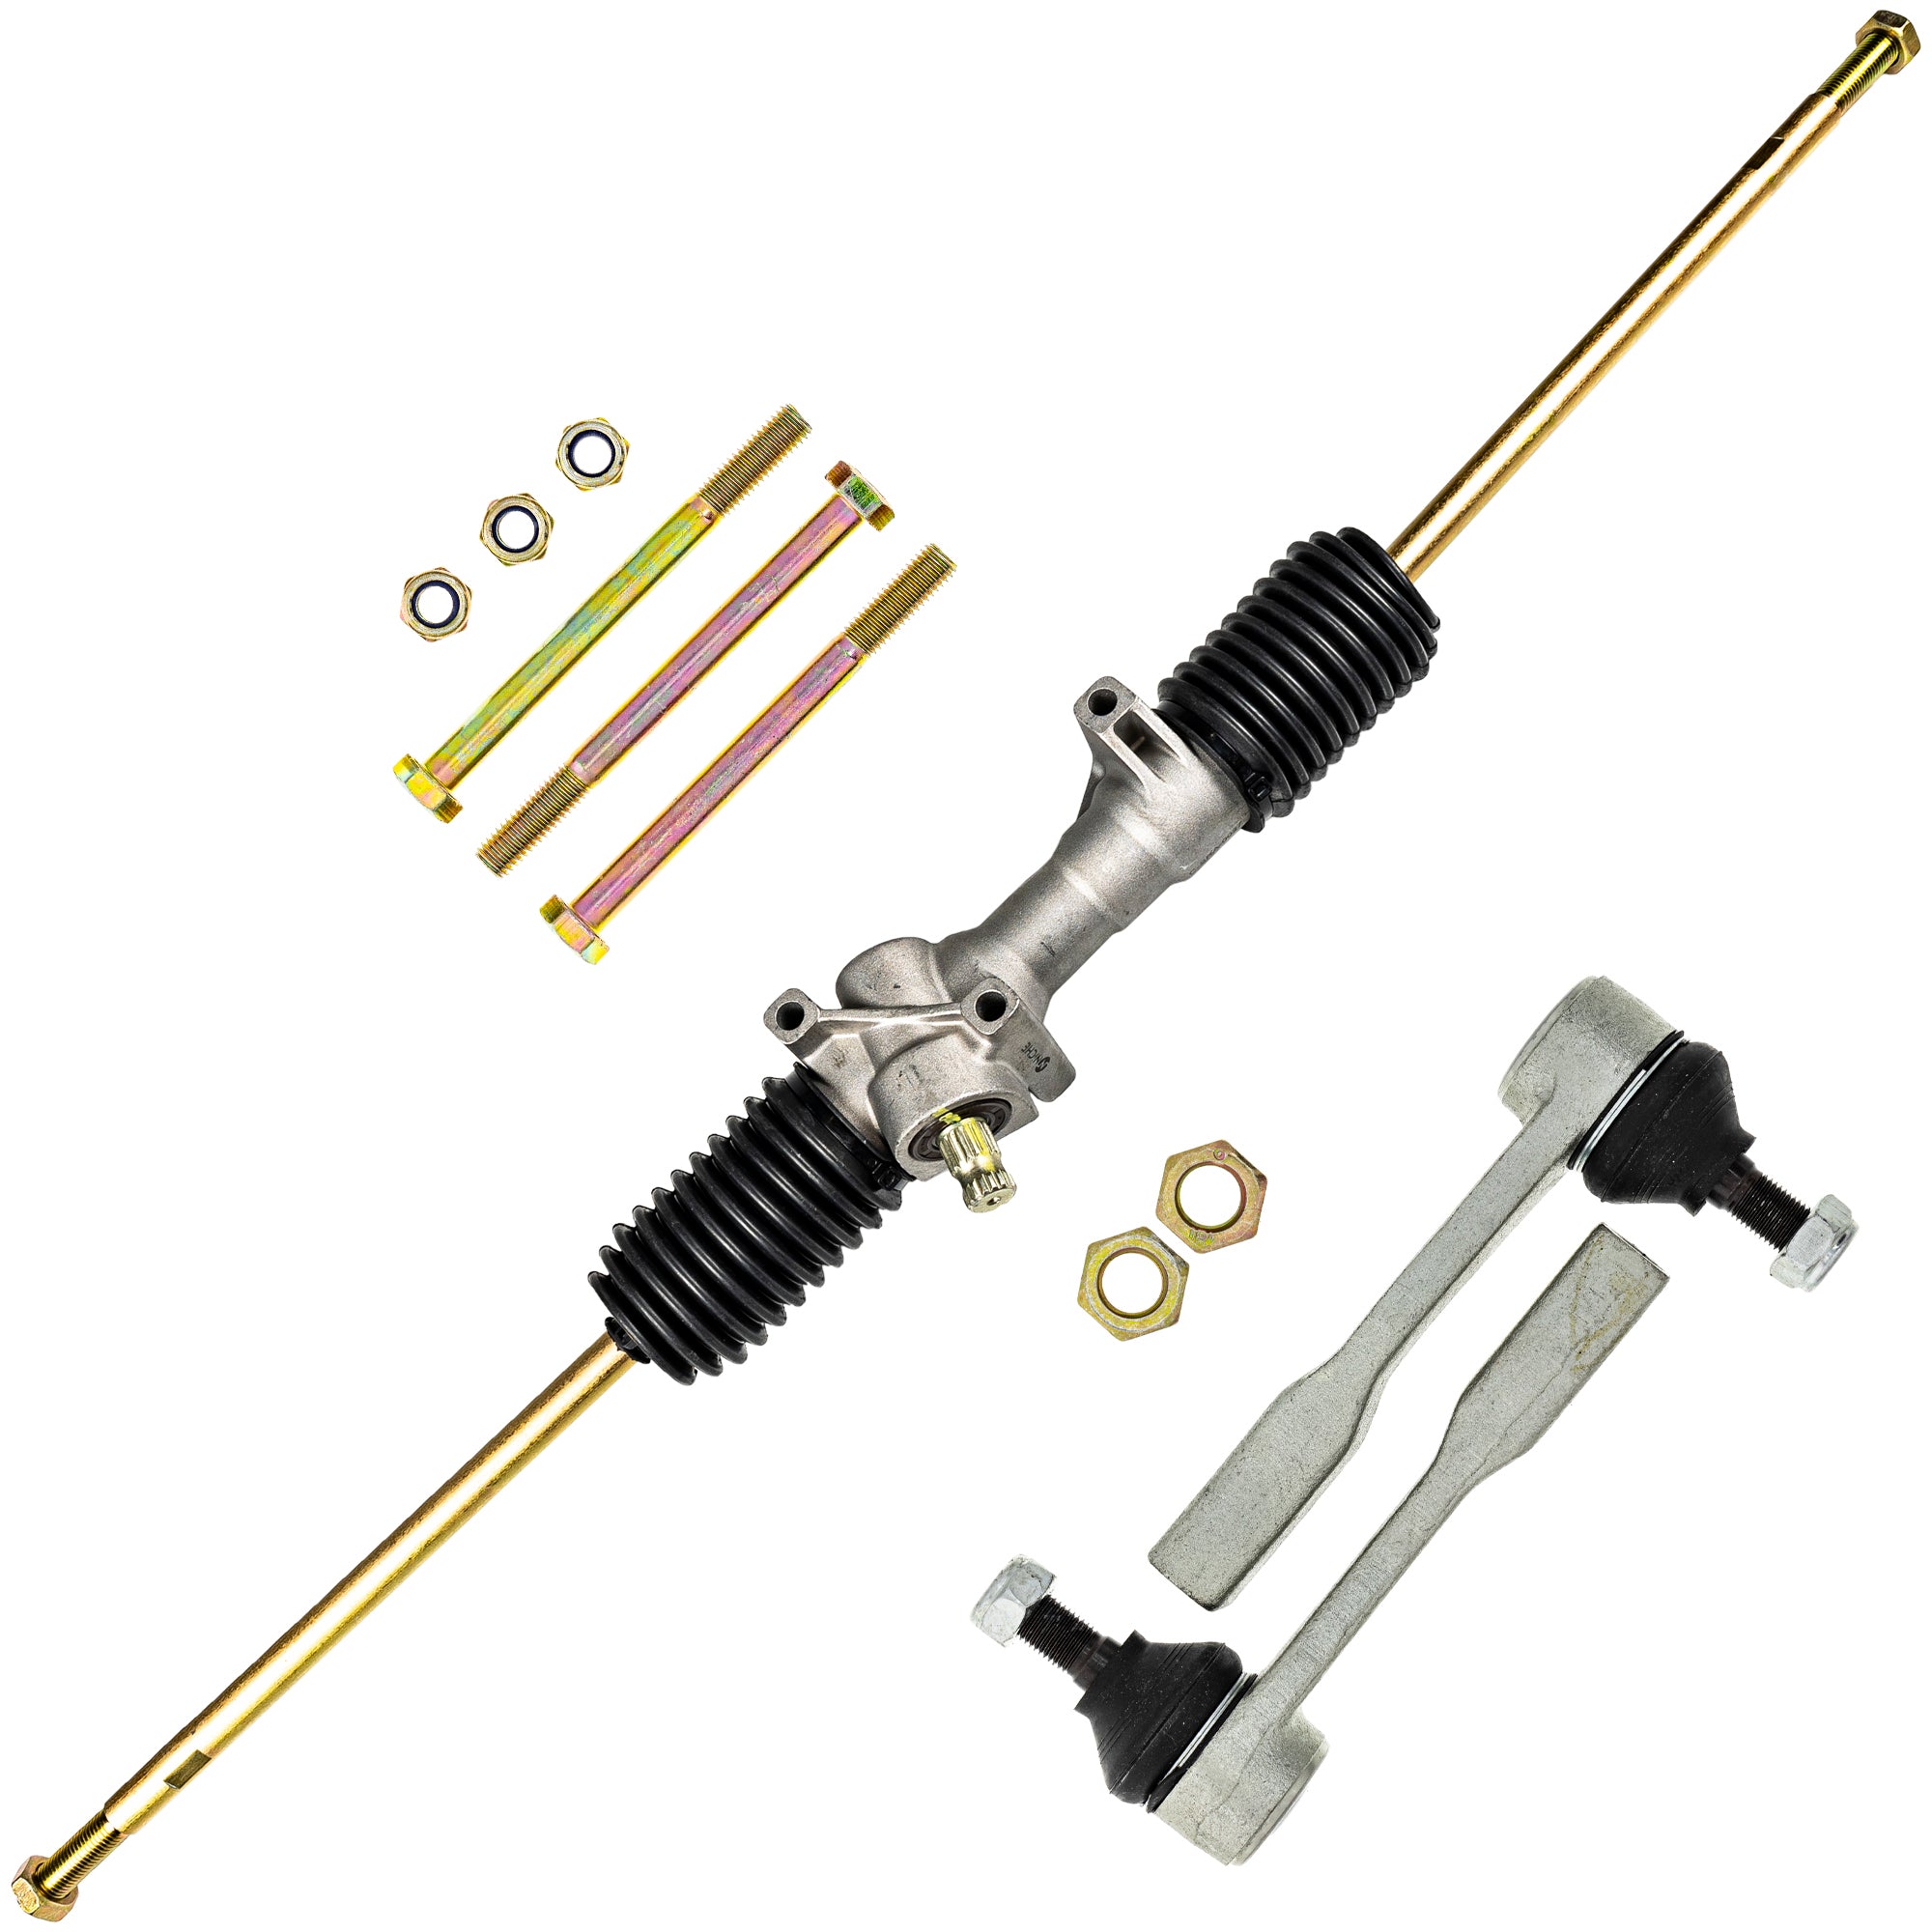 Steering Rack Assembly & Tie Rods Kit for zOTHER Polaris Ranger NICHE MK1009505